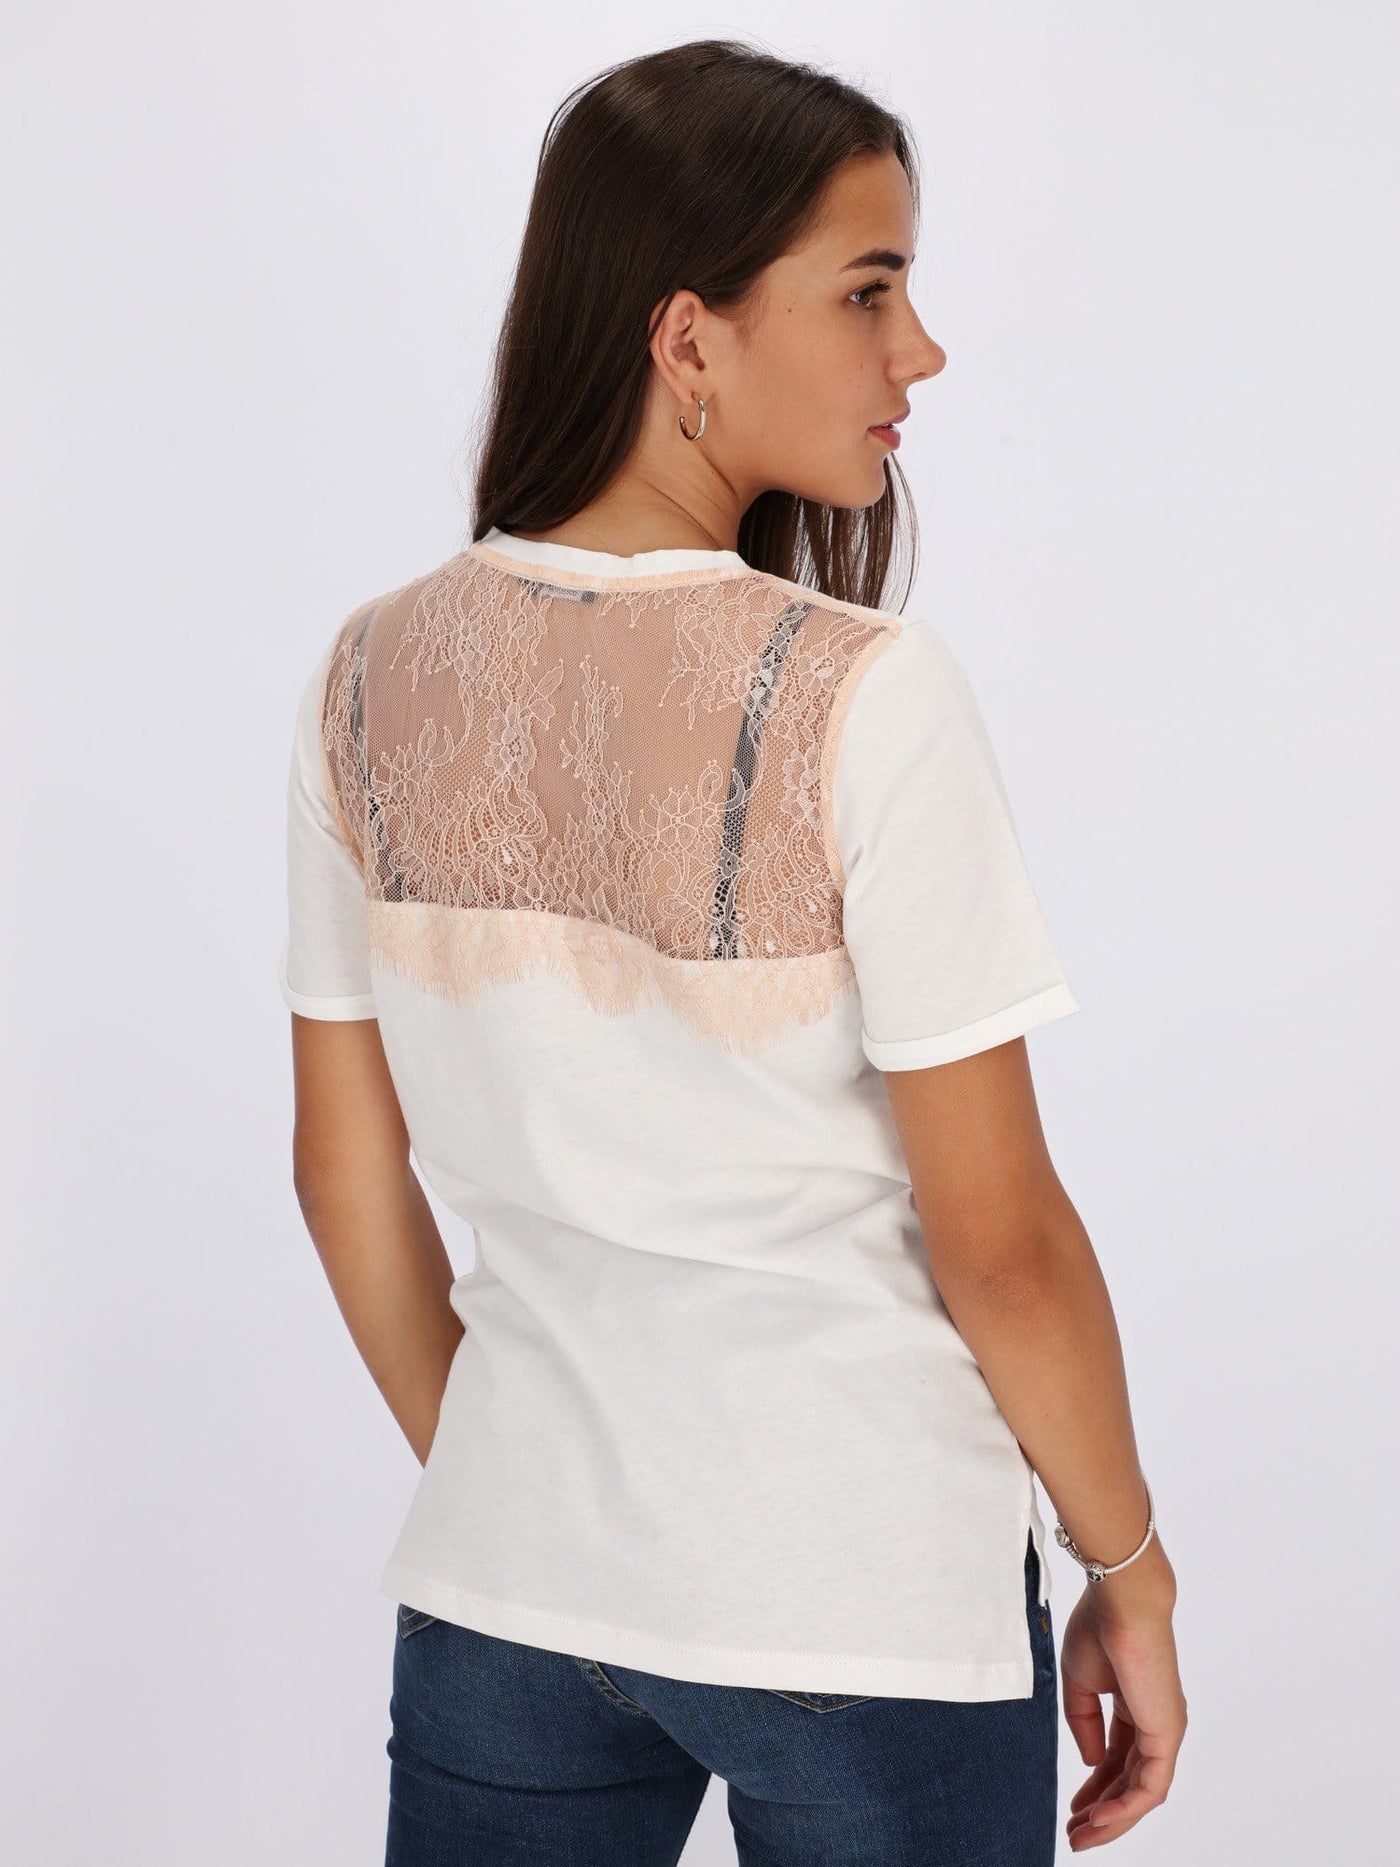 OR Tops & Blouses Lace Back Top with Front Text Print